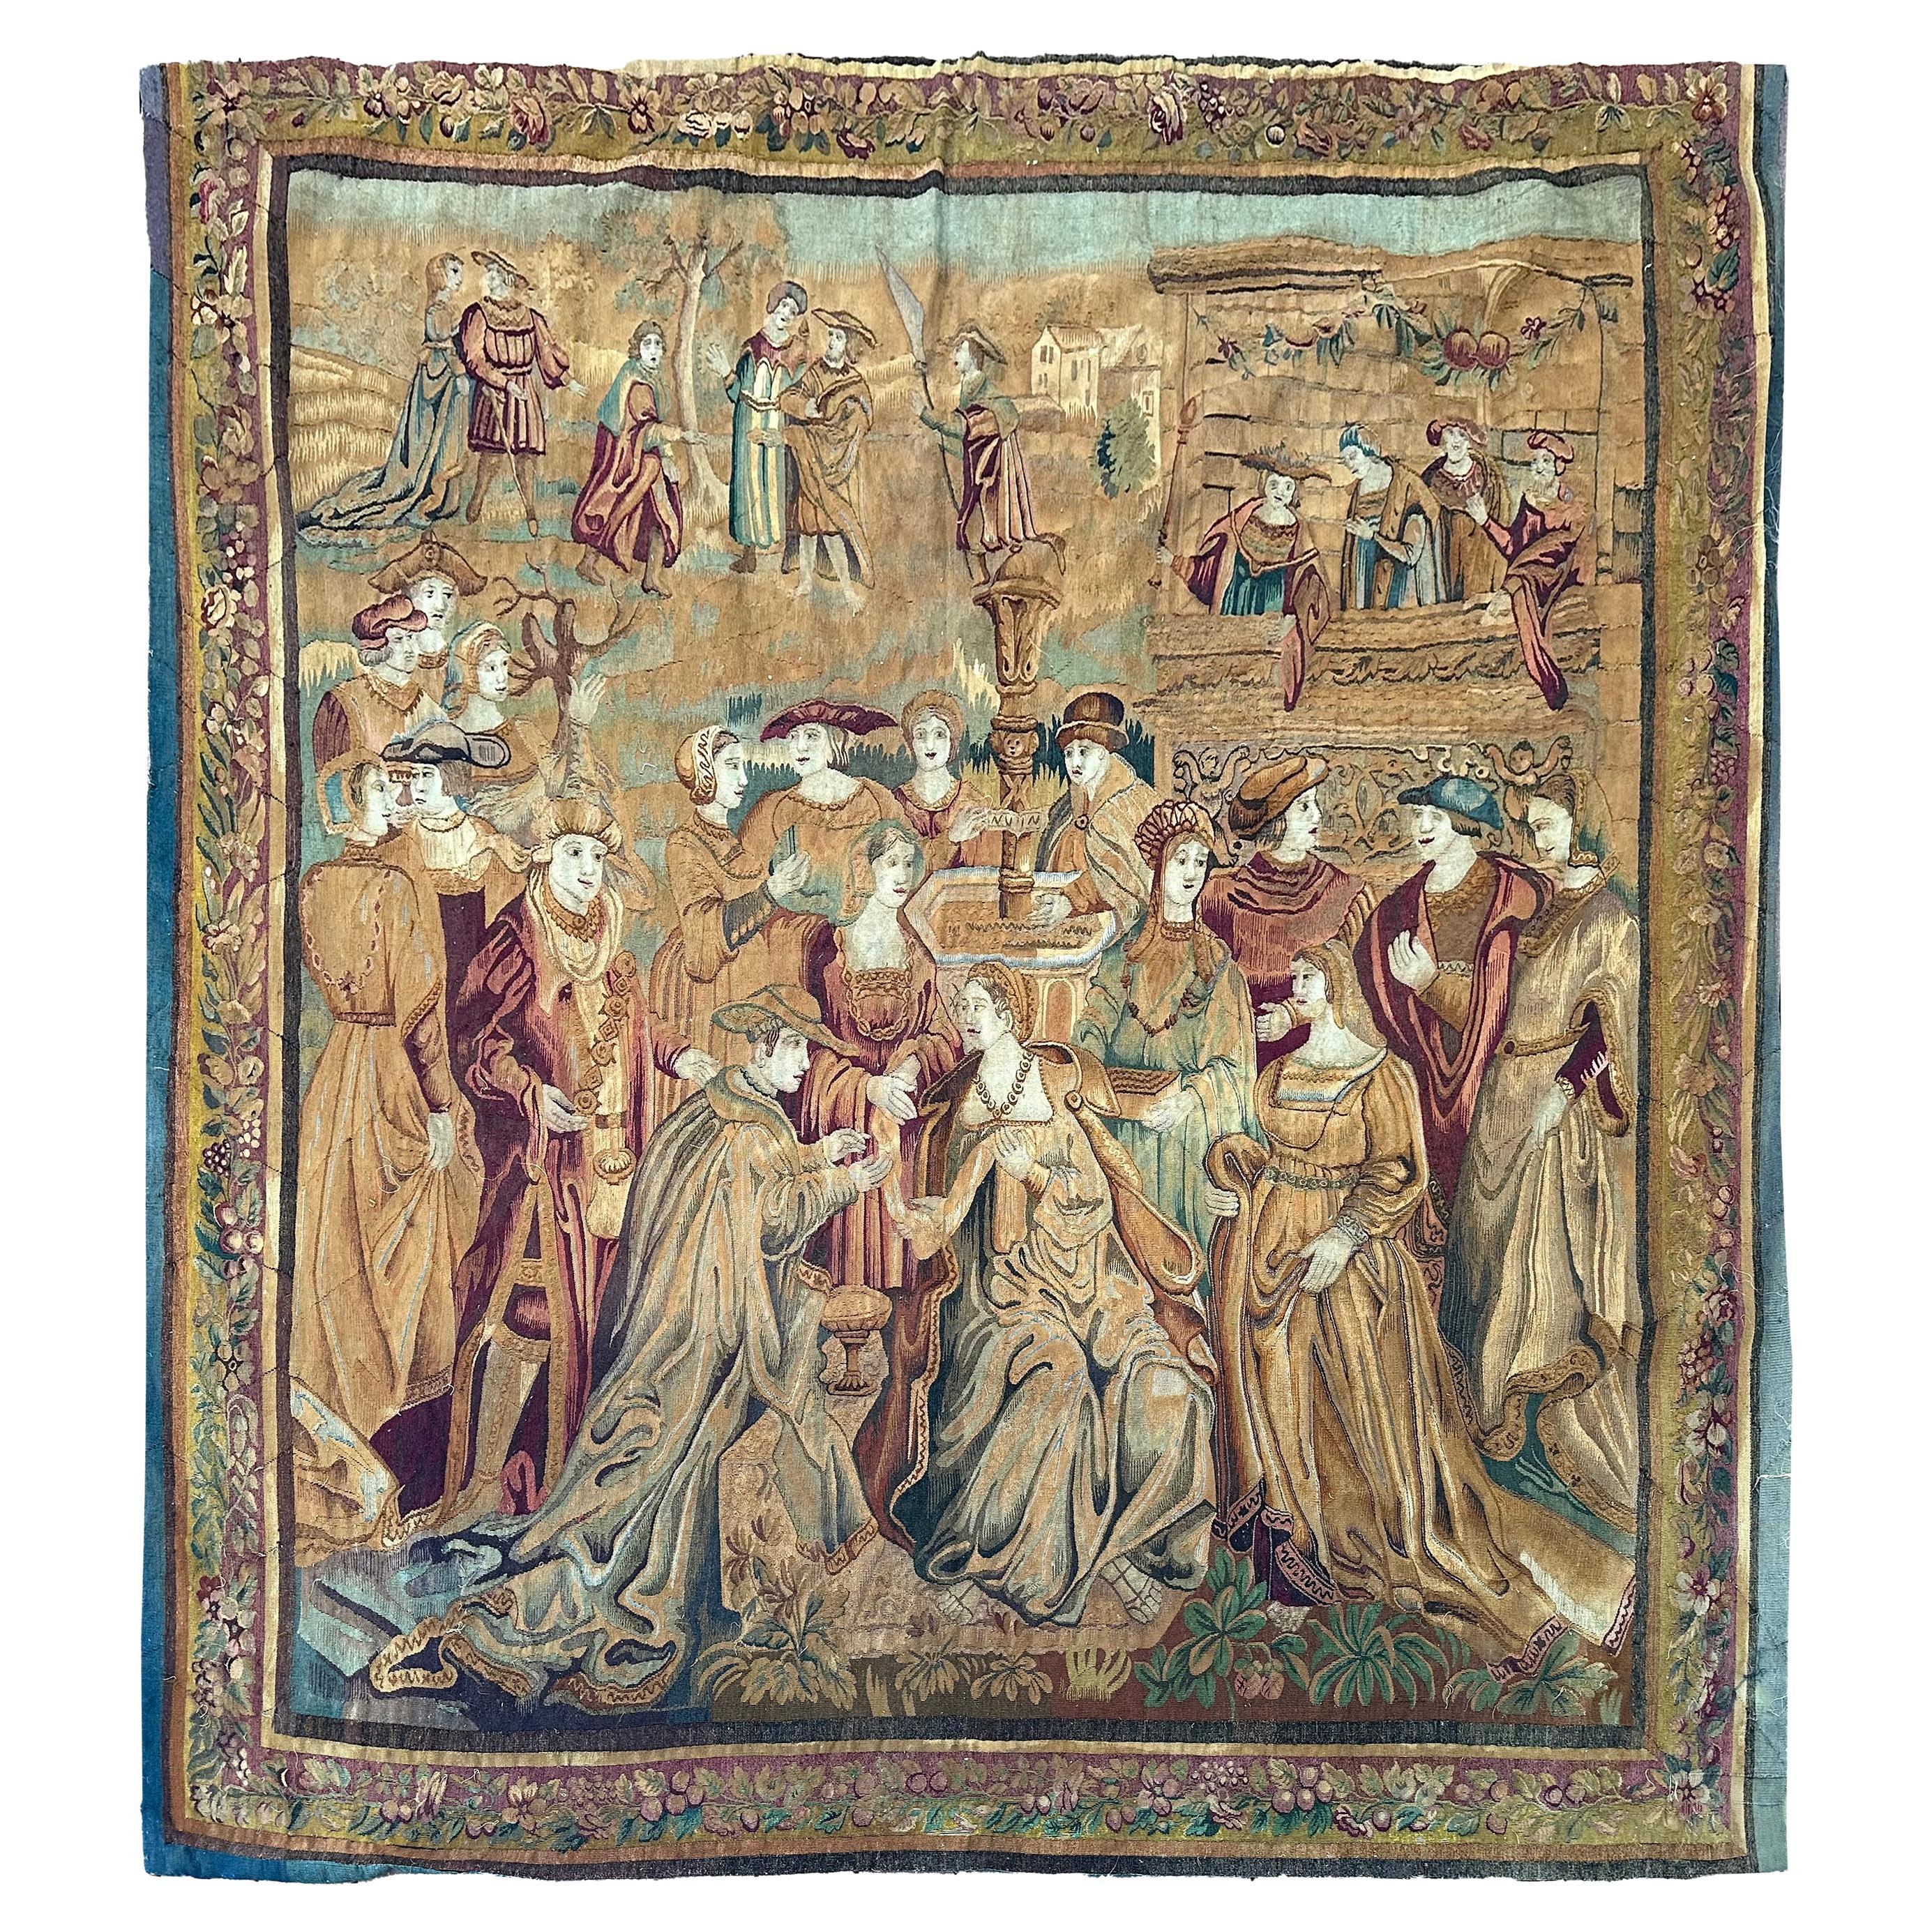 1890 Antique French Tapestry Arts & Crafts Ceremonial 8x9 239cm x 257cm